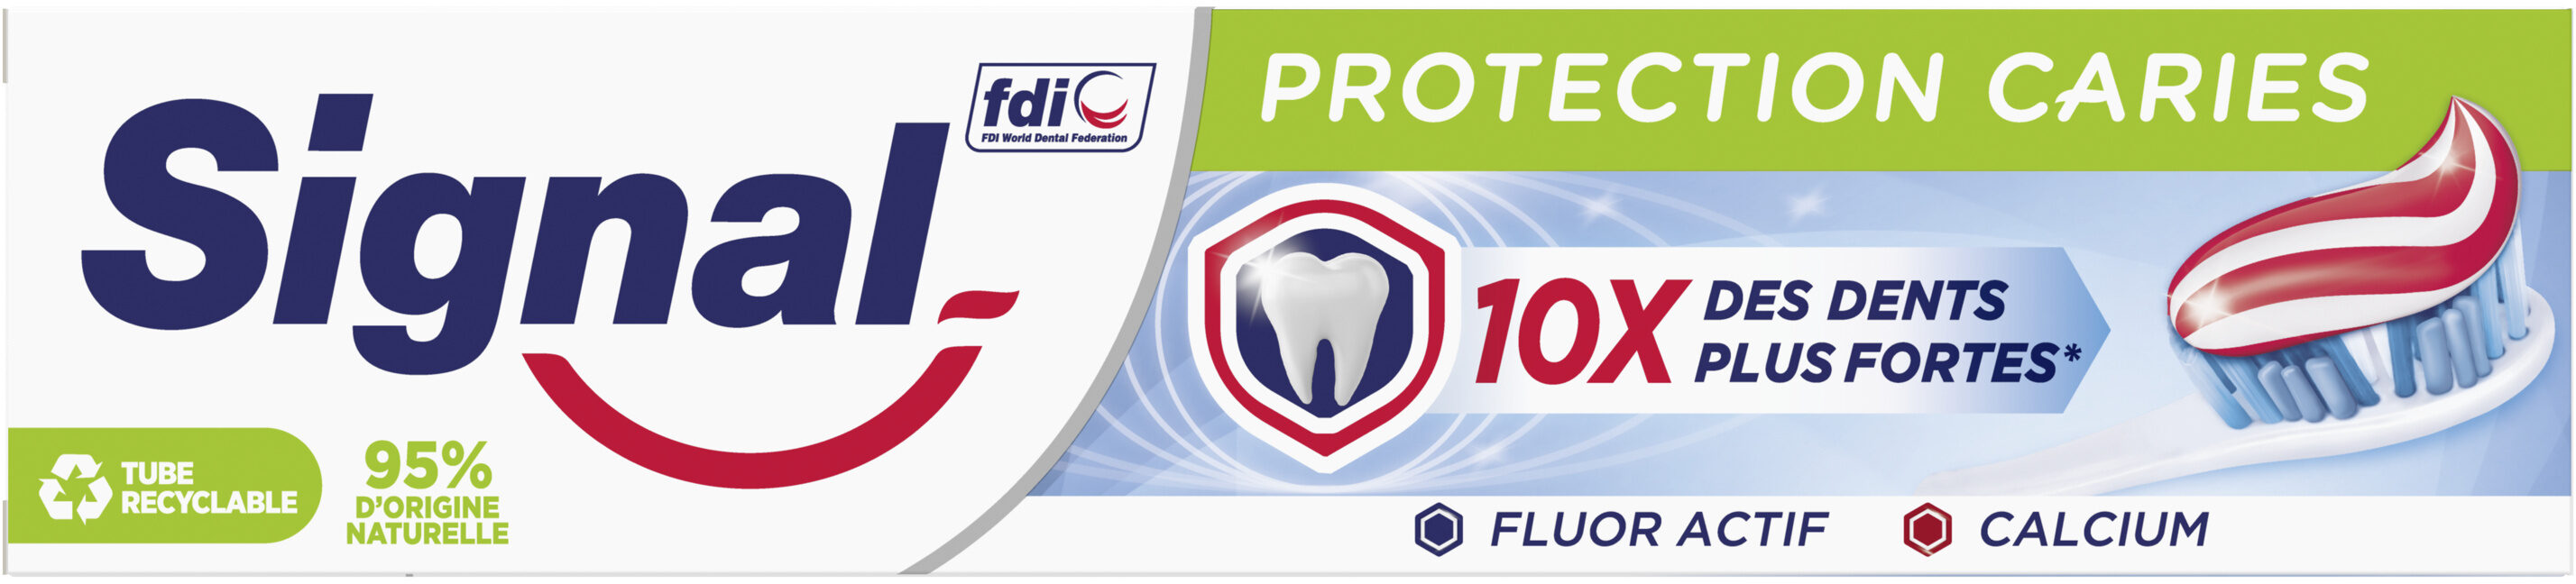 Signal Dentifrice Protection Caries 125ml - Produit - fr